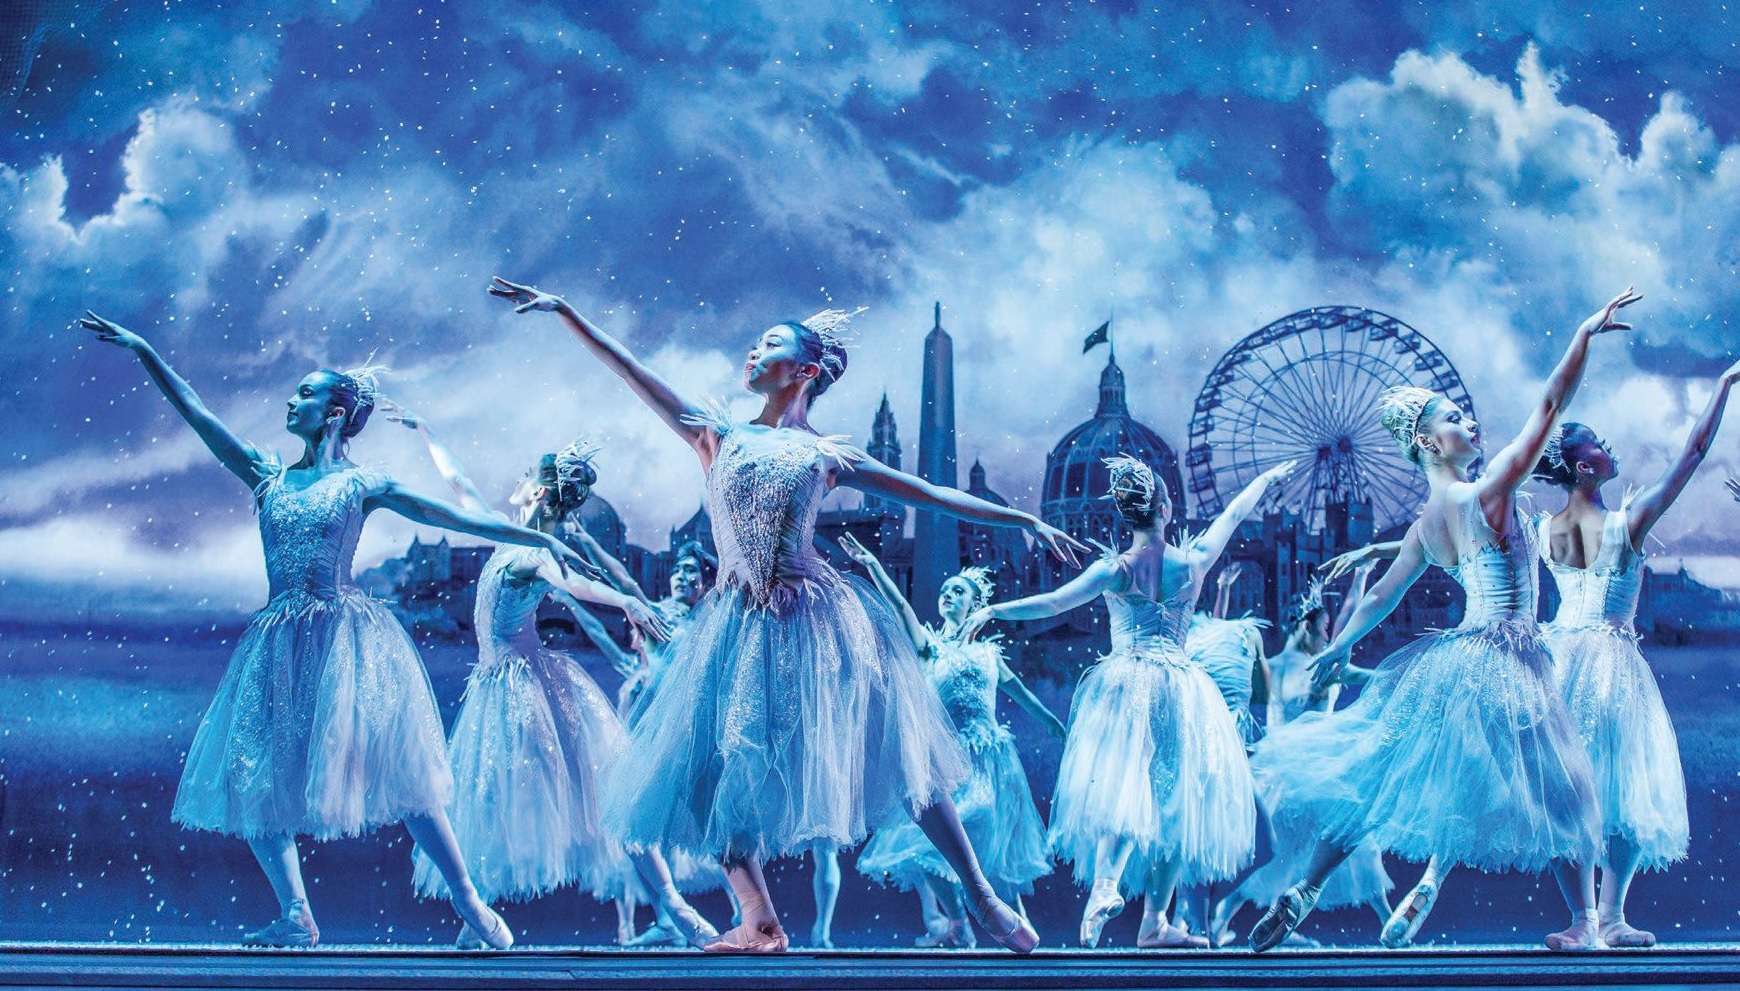 Catch the Joffrey Ballet’s beloved Nutcracker at its new home in the Lyric Opera House. PHOTO BY CHERYL MANN